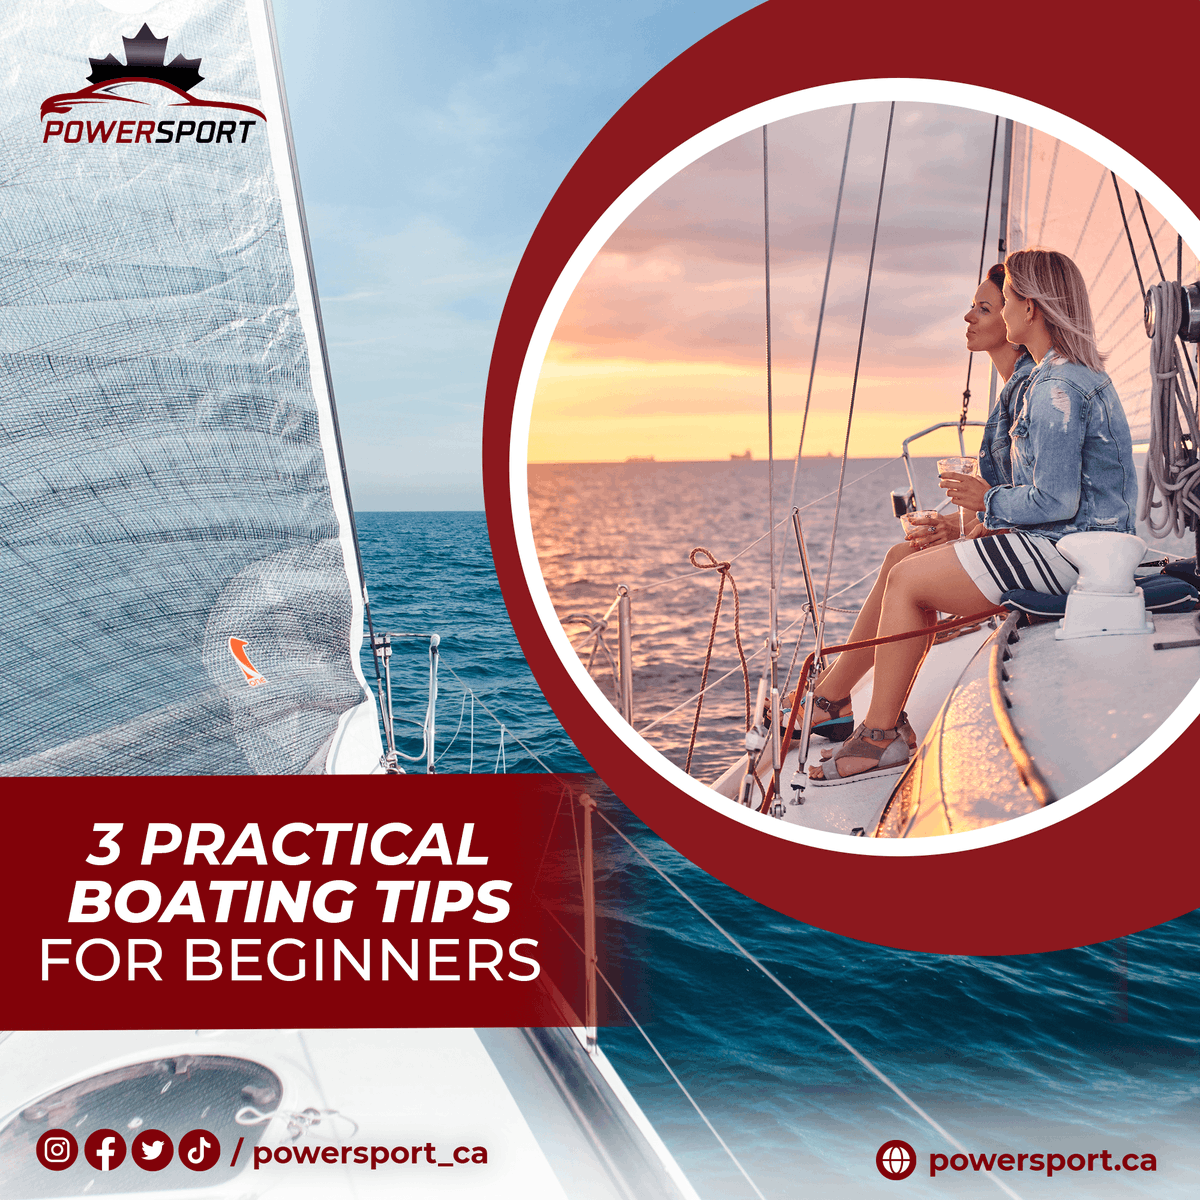 📌 Always Keep One Eye on the Weather
One of the factors you will be at the mercy of when on the water is the weather. It is, however, one of the easiest to manage once you learn how to read and comprehend the weather prediction. 

👇

#boatingexperience #boatpreparation